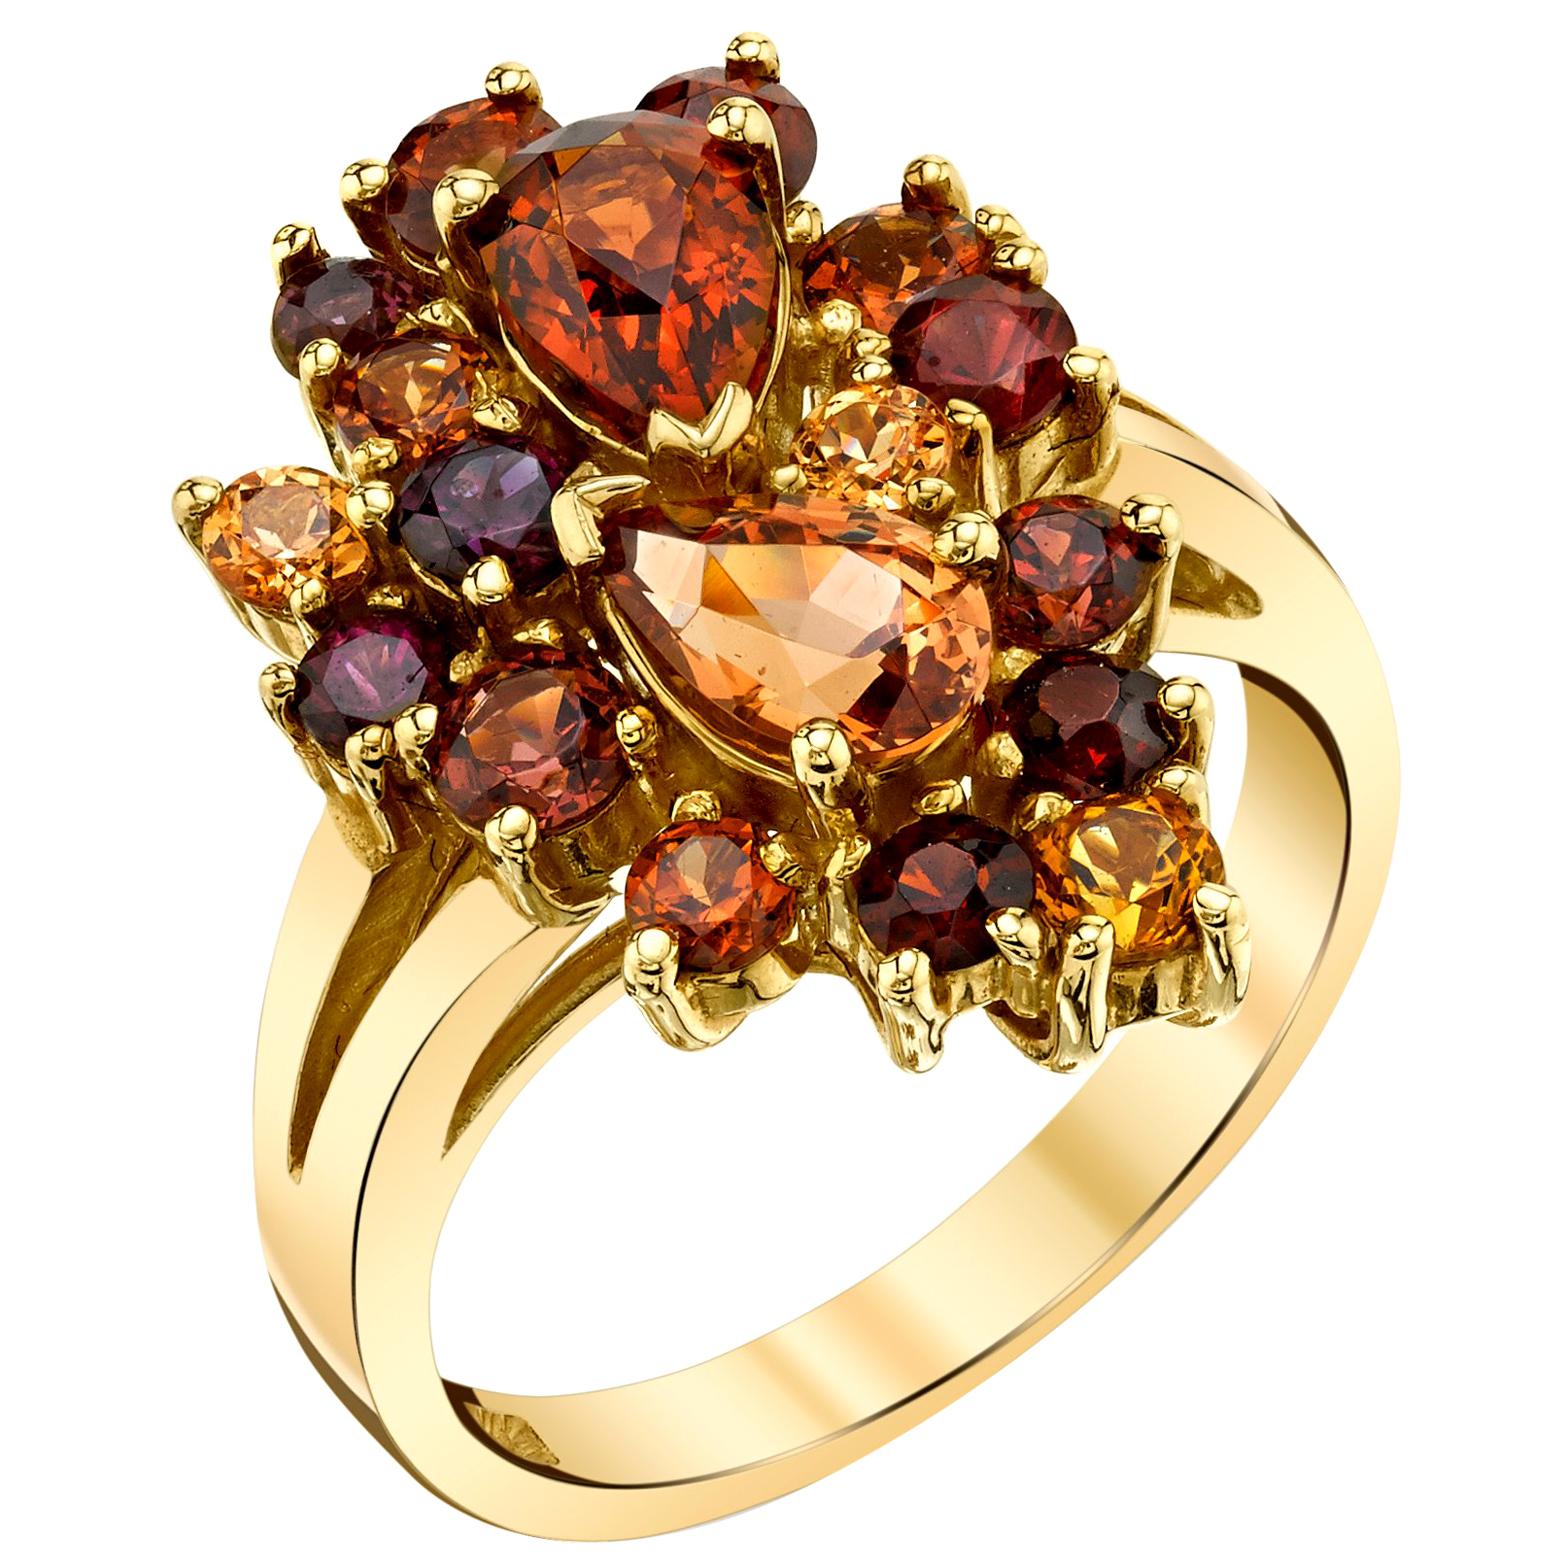  3.58 ct. t.w. Multicolored Garnet 18k Yellow Gold Paisley Cluster Cocktail Ring